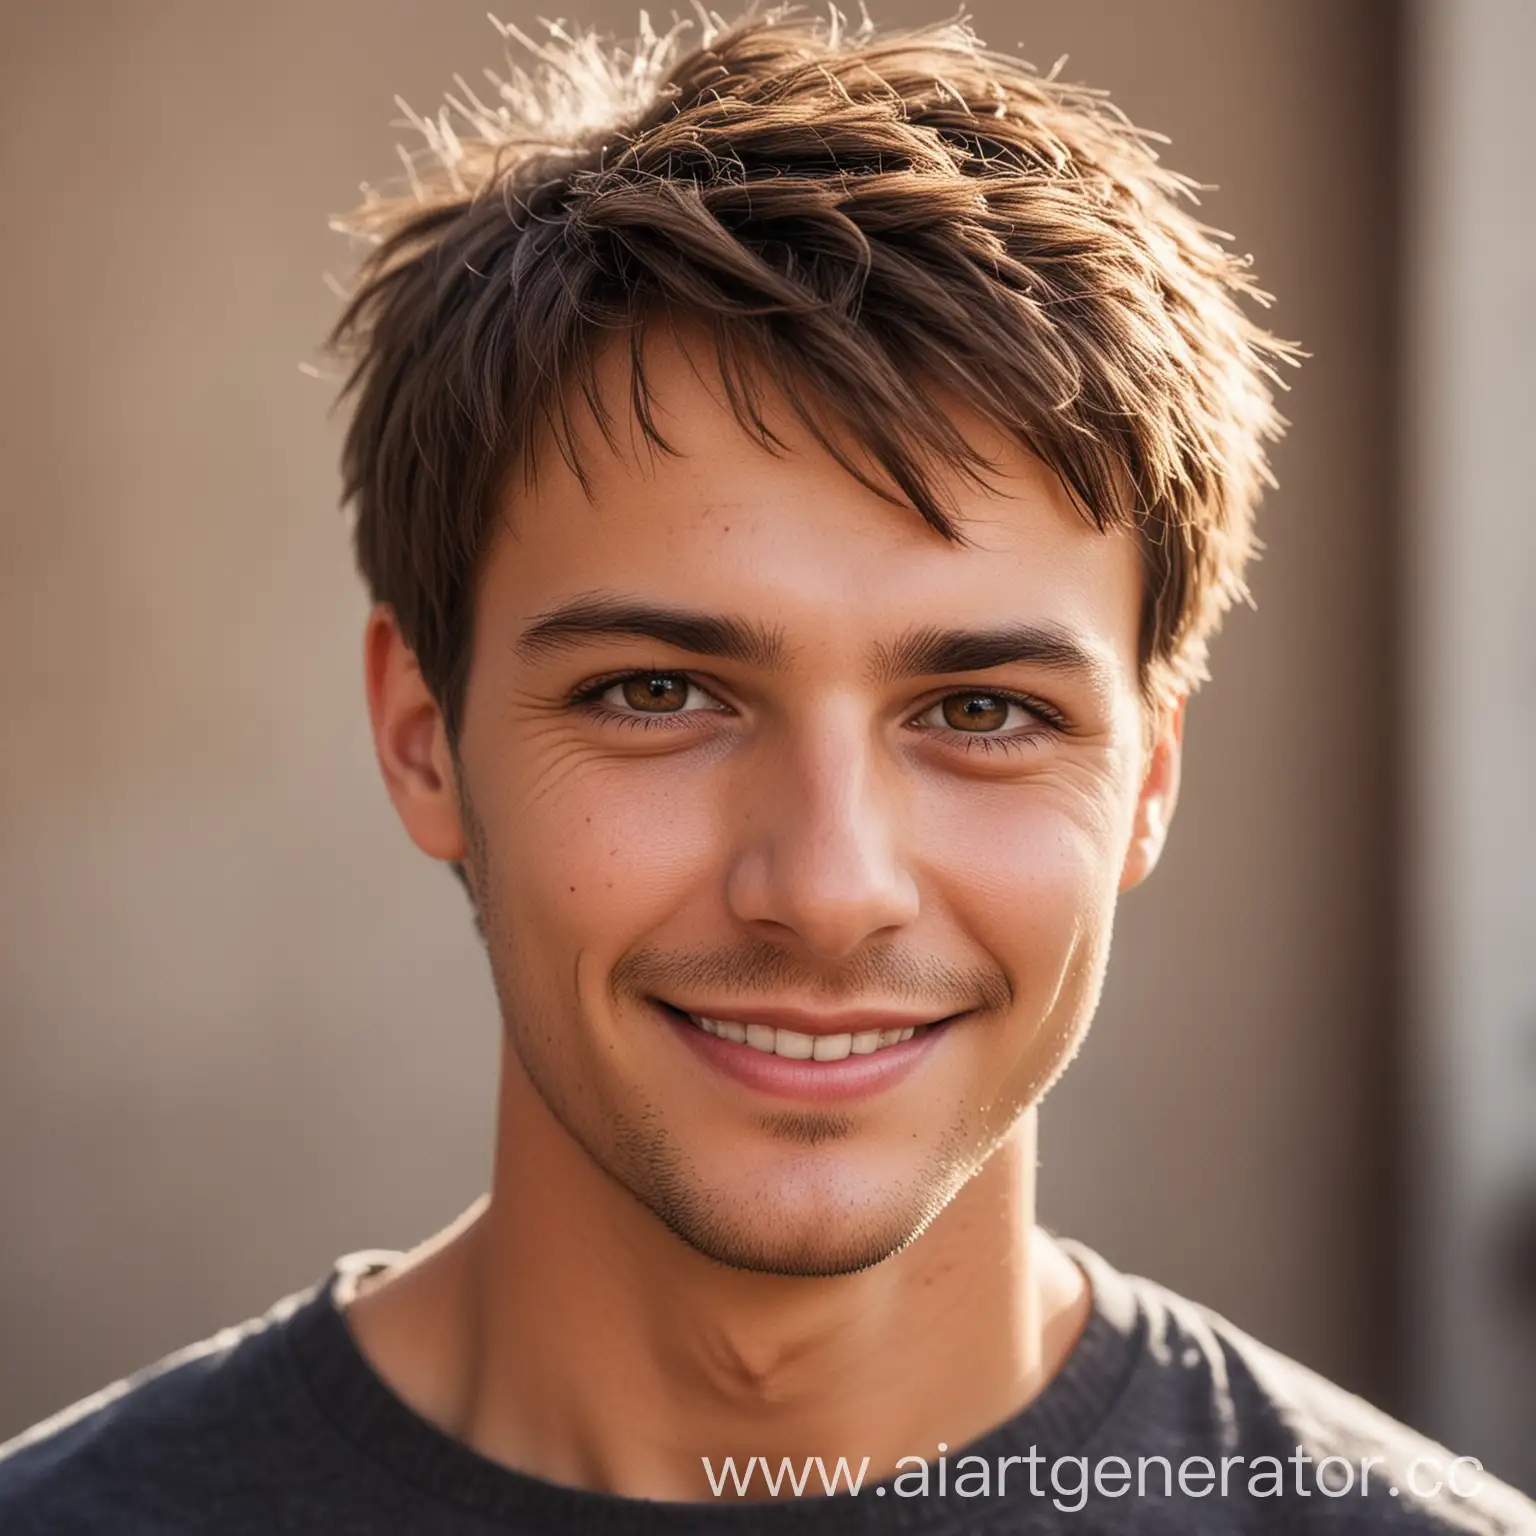 European-Courier-Mikael-Brave-Deliveryman-with-Brown-Eyes-and-a-Beautiful-Smile